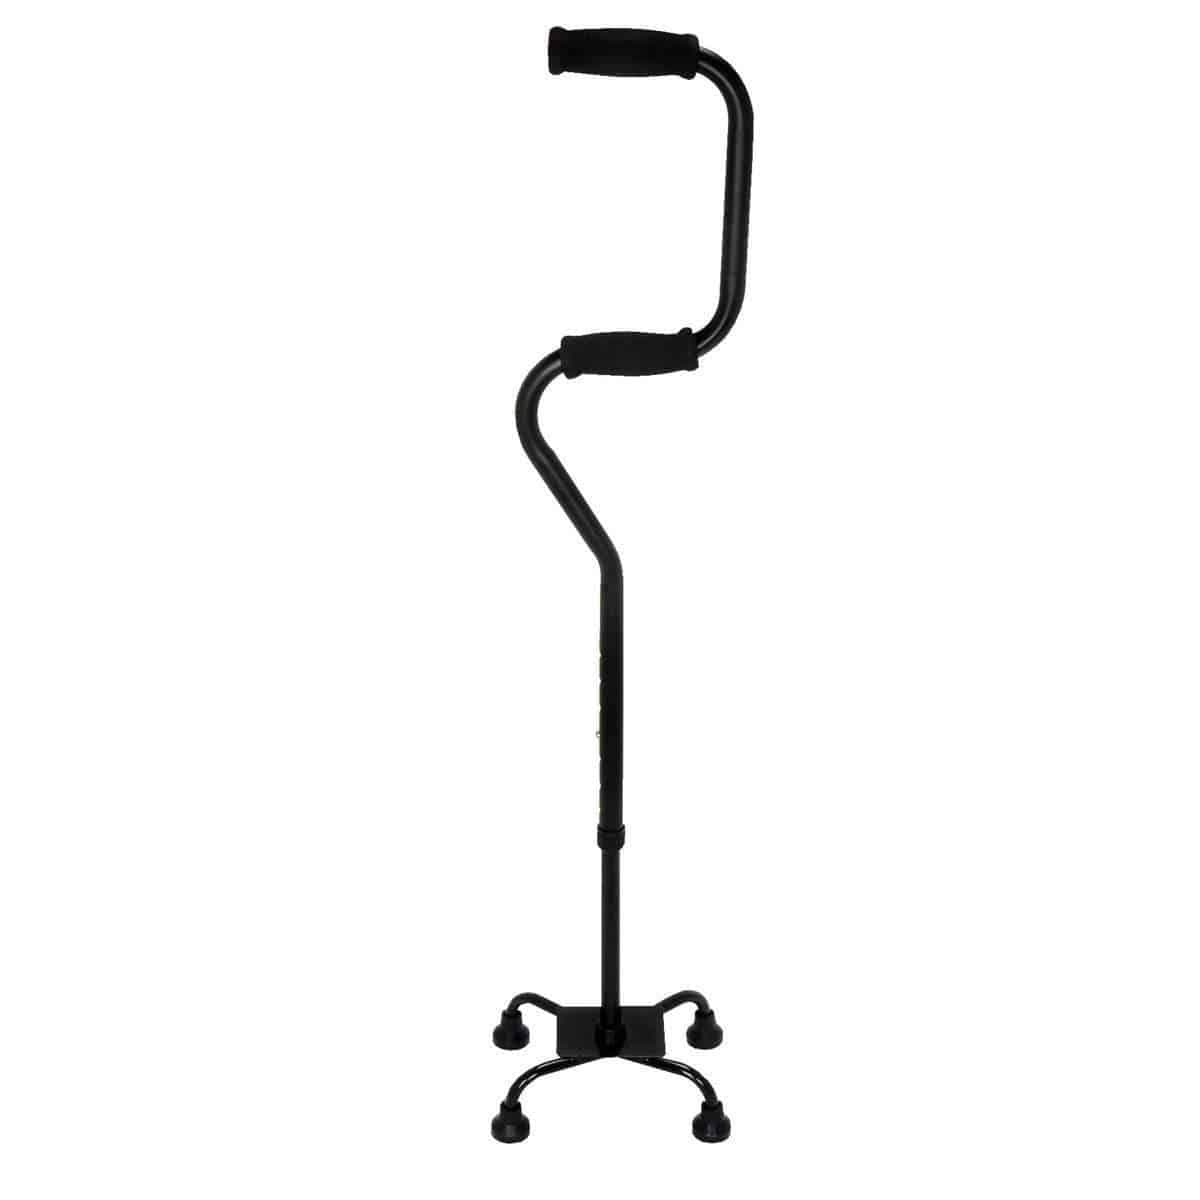 HealthSmart Sit-to-Stand Adjustable Quad Cane with 4 Foot Base - Senior.com Canes